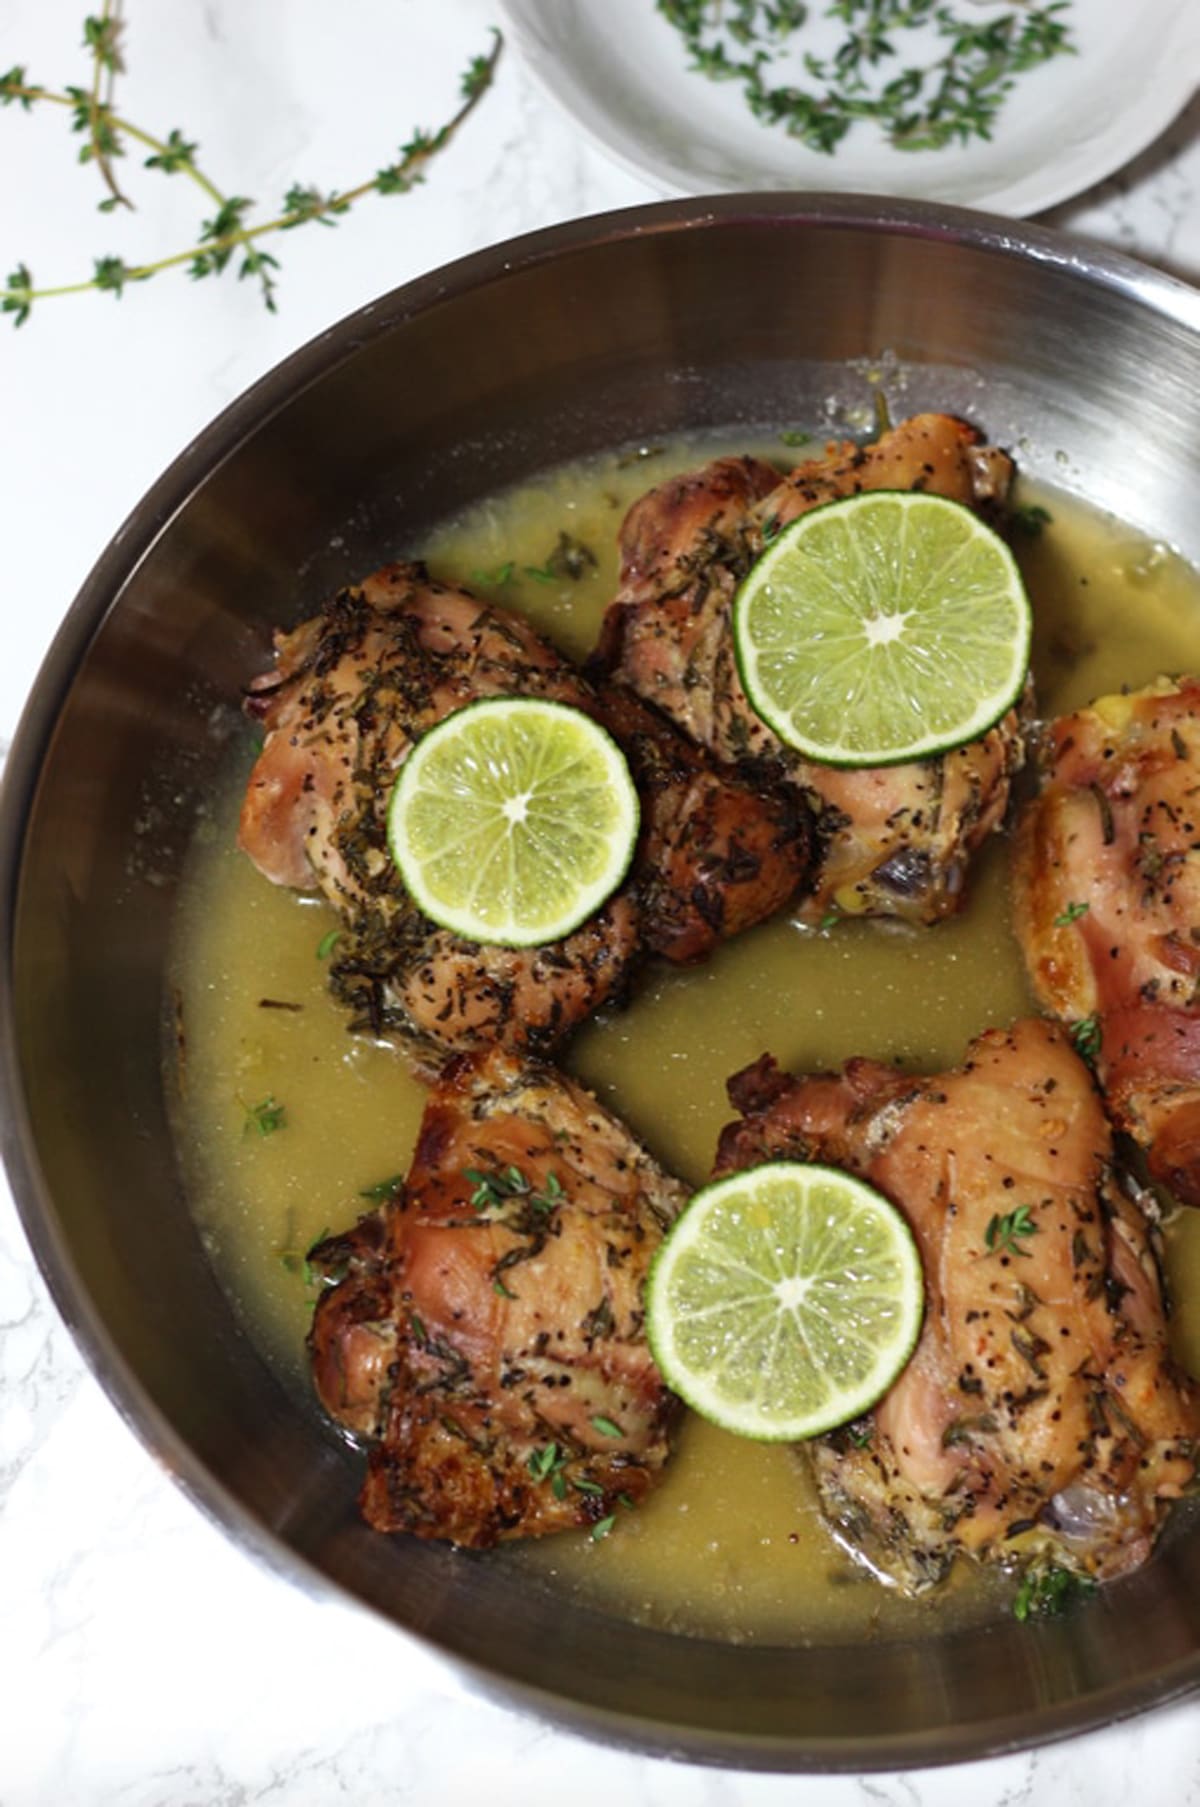 Five chicken thighs baked in a lemon garlic thyme and rosemary sauce, topped with fresh lemon slices.